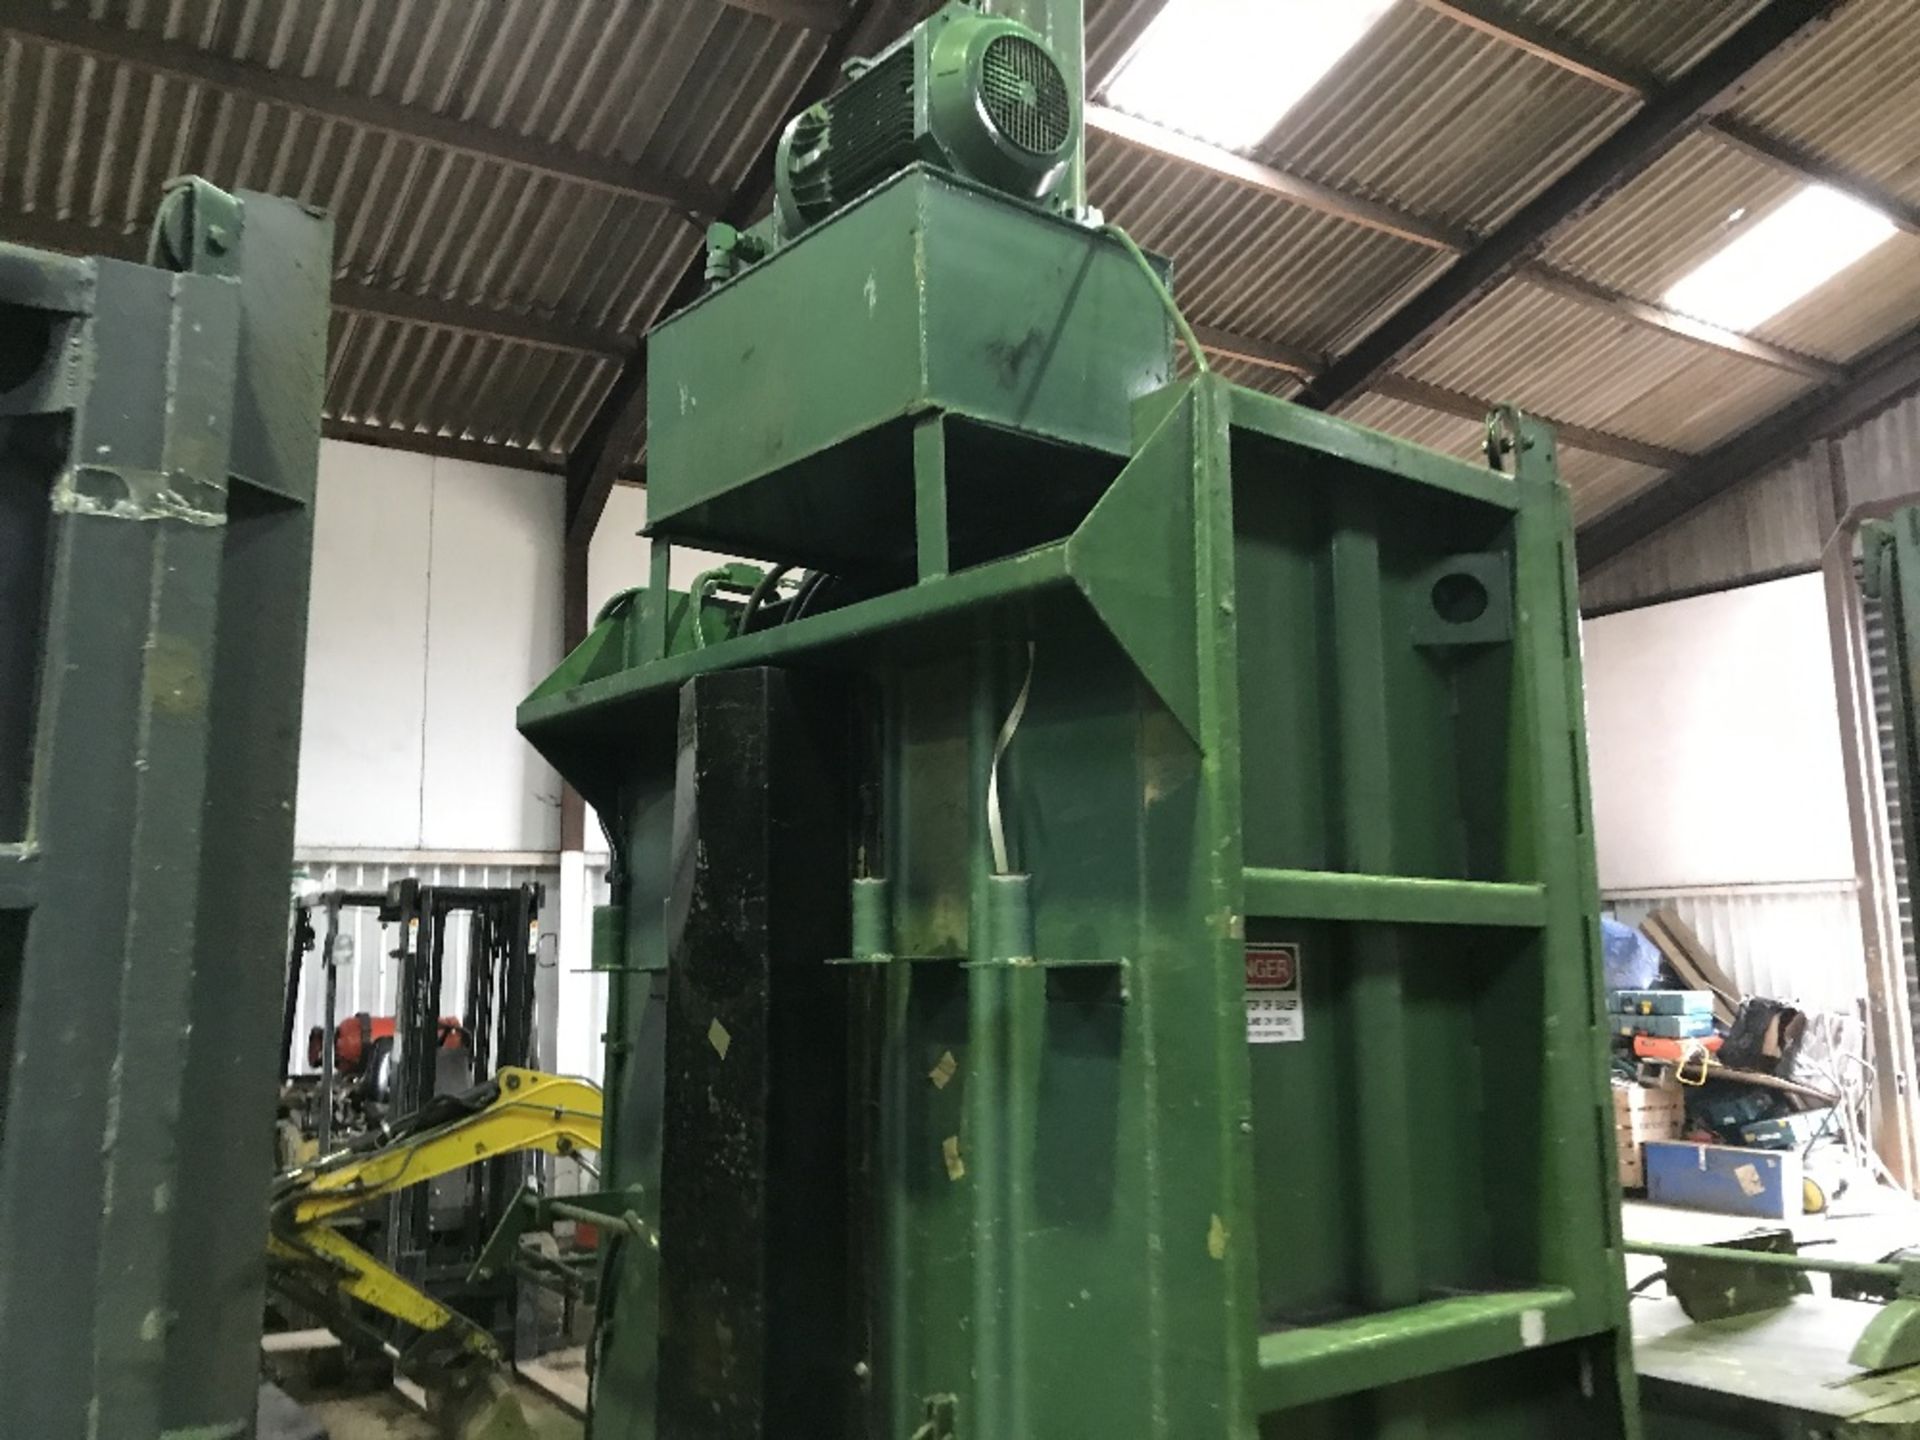 DICOM 4830 HEAVY DUTY WASTE BALER UNIT, DIRECT EX MAJOR COMPANY LIQUIDATION, REMOVED FROM A - Image 4 of 4